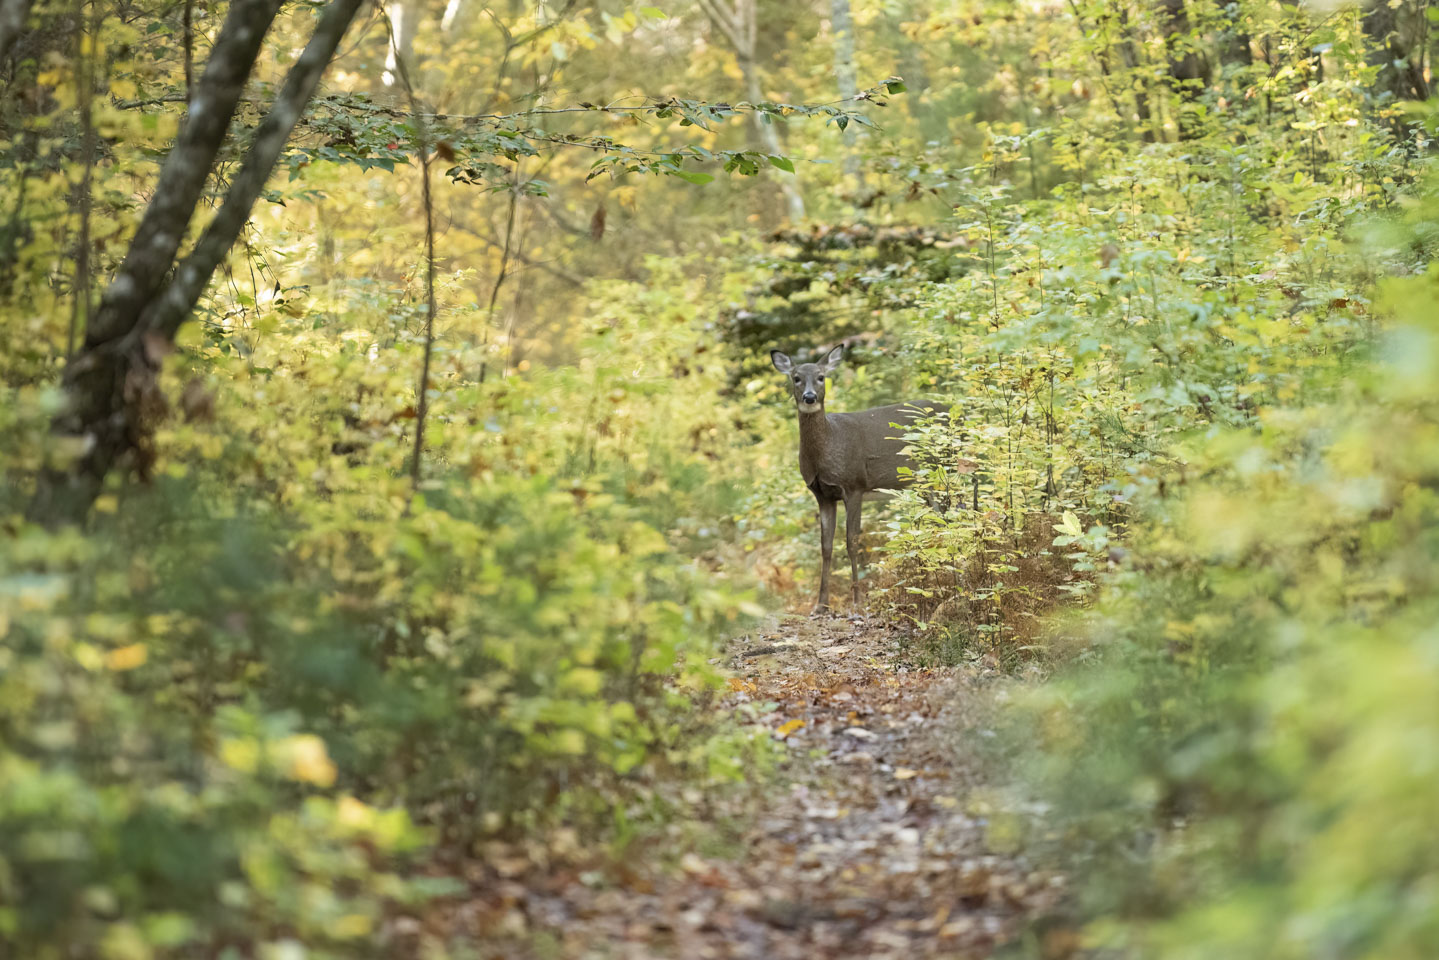 Deer on trail looking directly at the camera